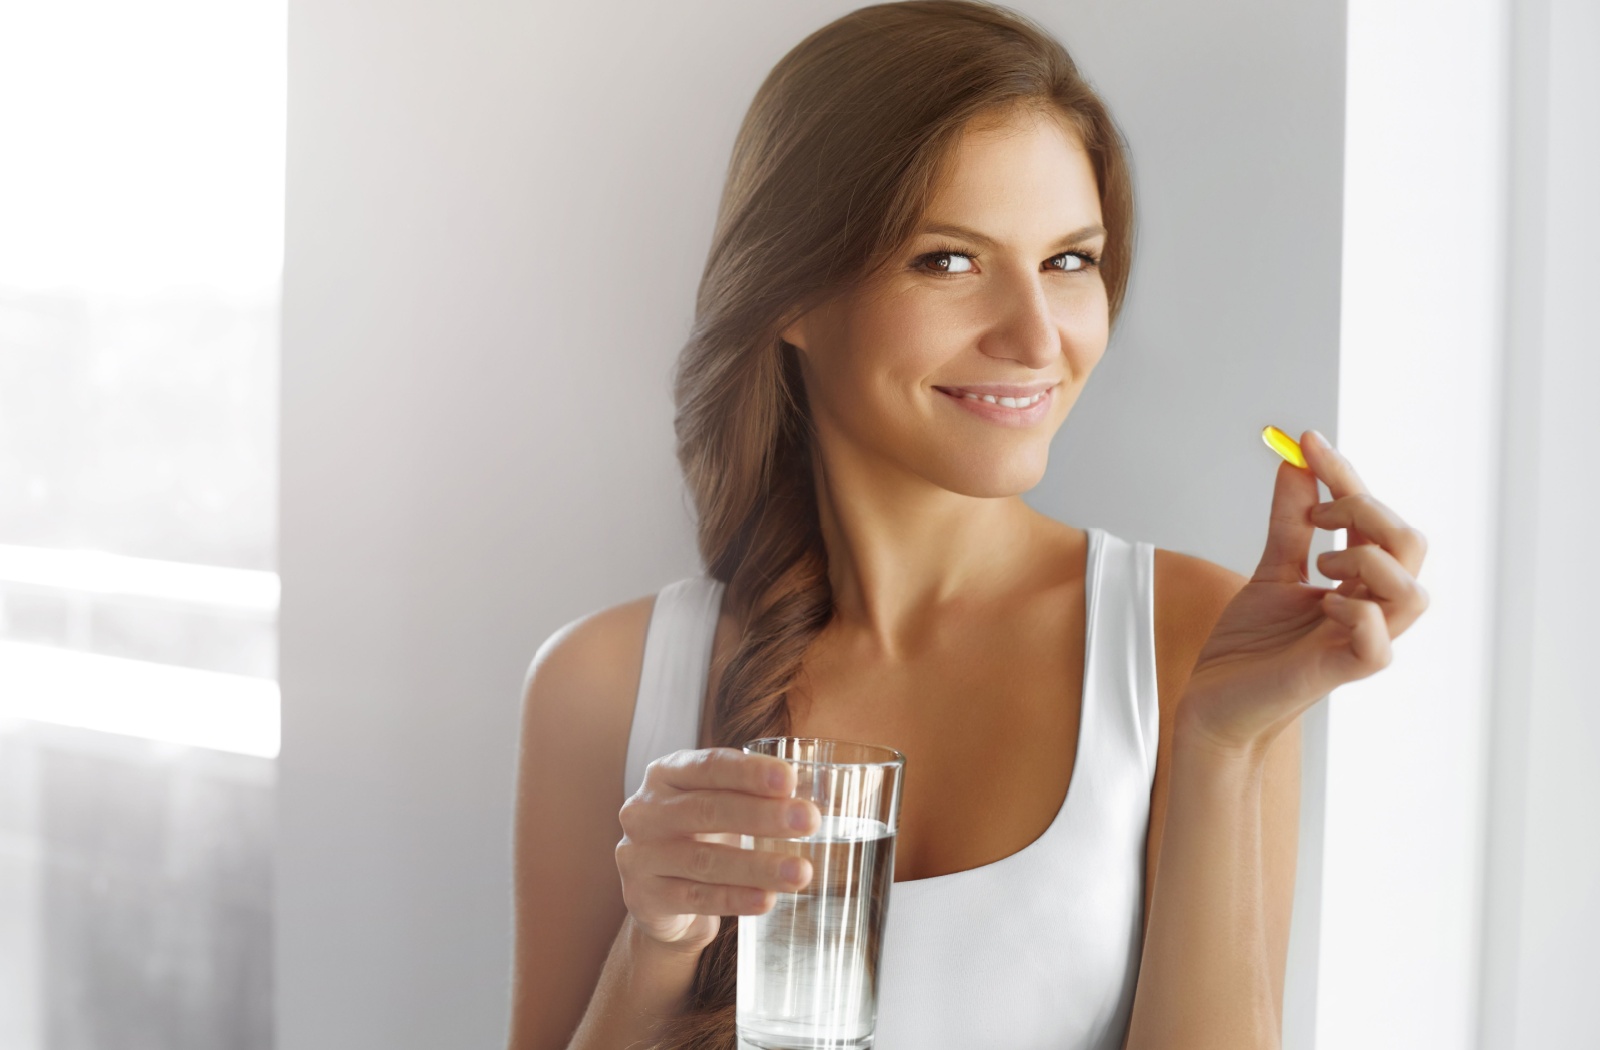 A smiling woman holding a fish oil pill in her left hand and a glass of water in her right hand